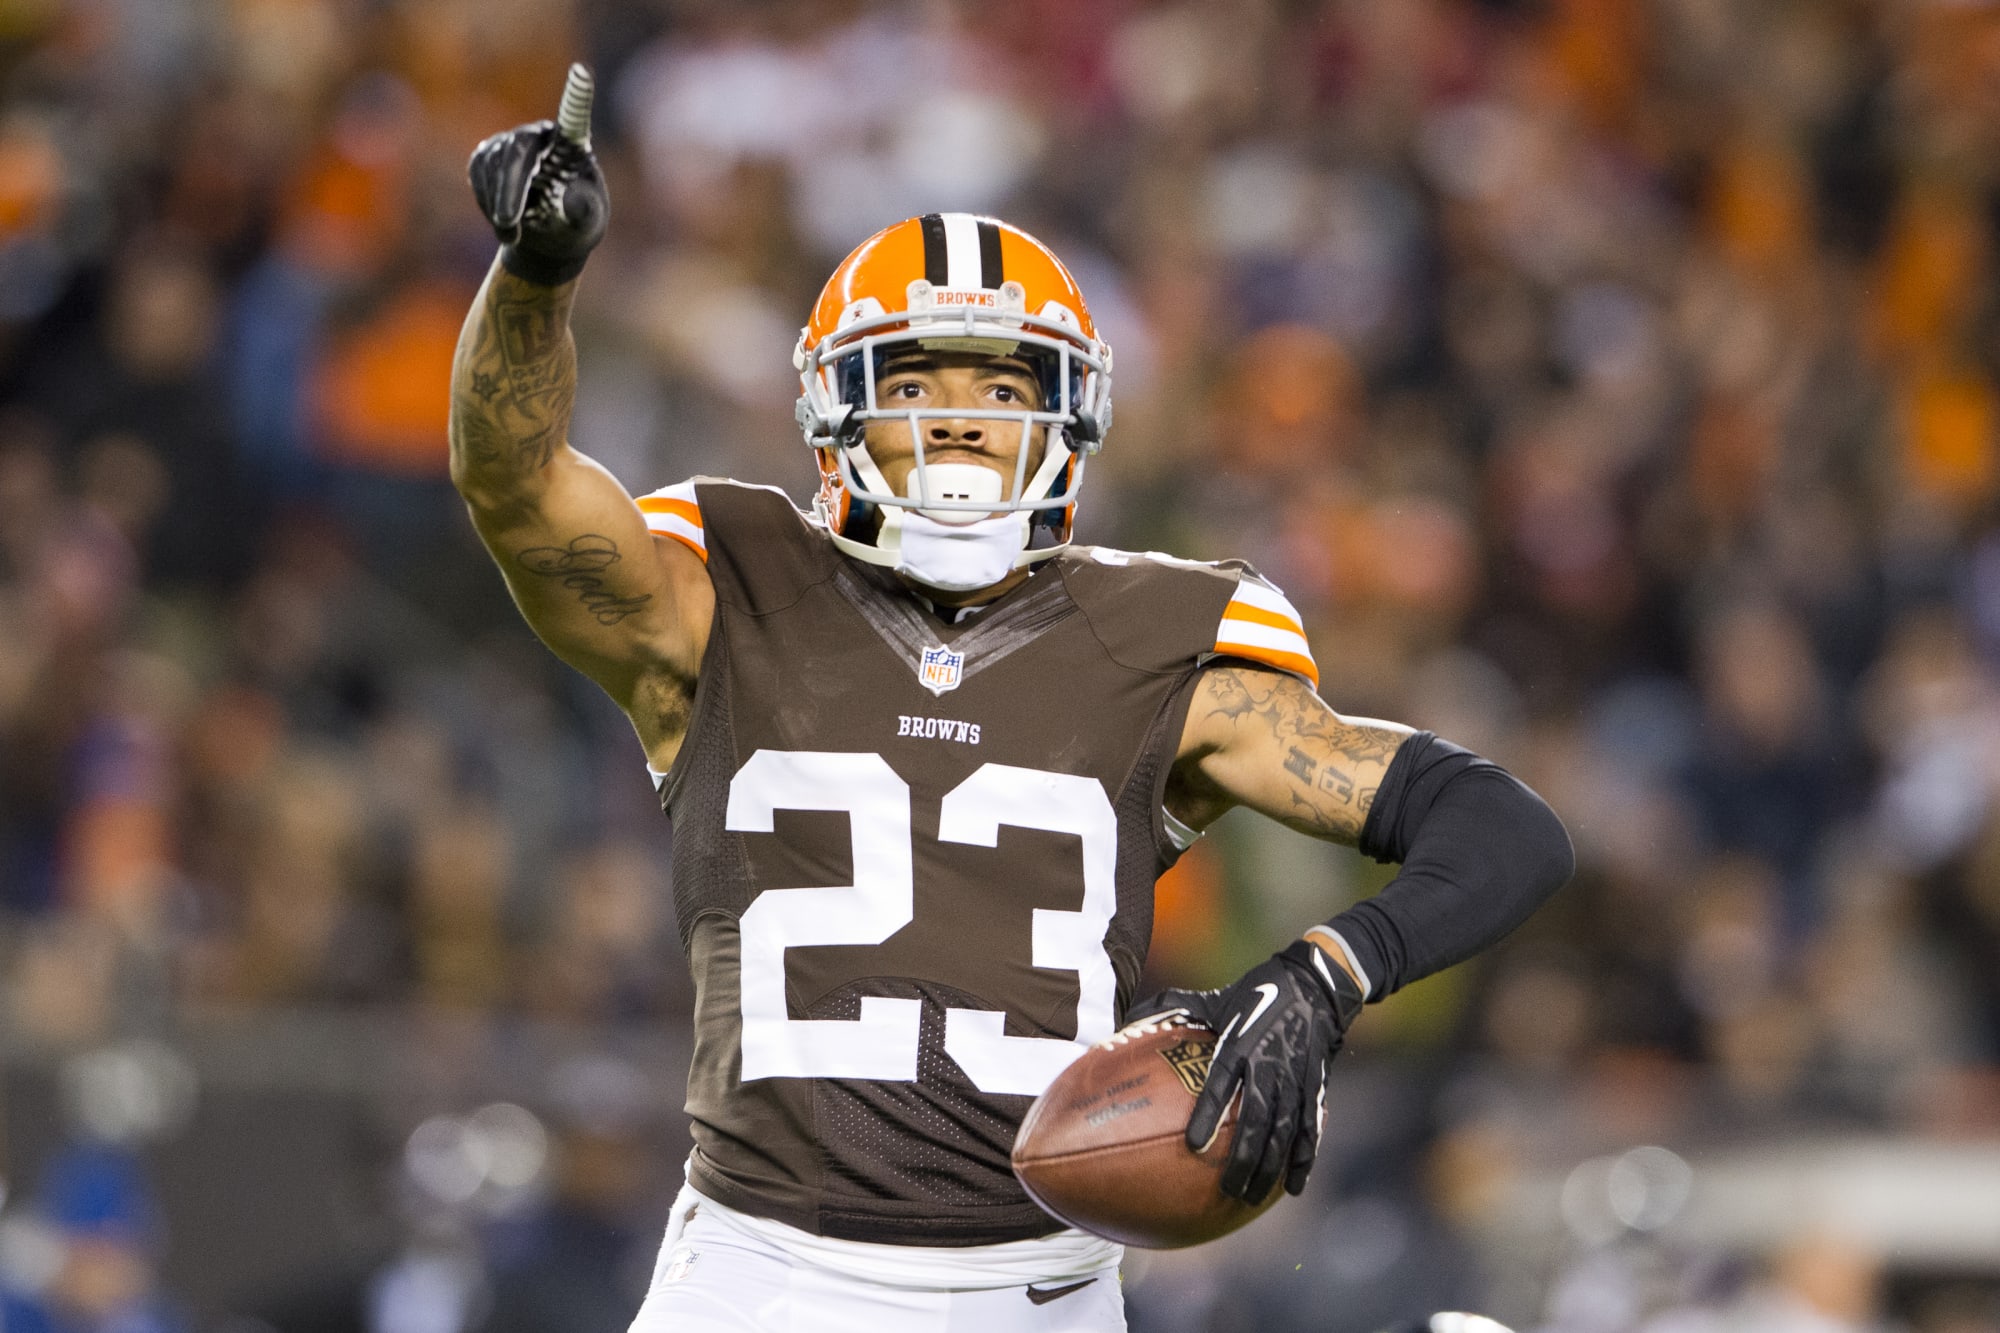 The seven Best Cleveland Browns players of the 21st Century